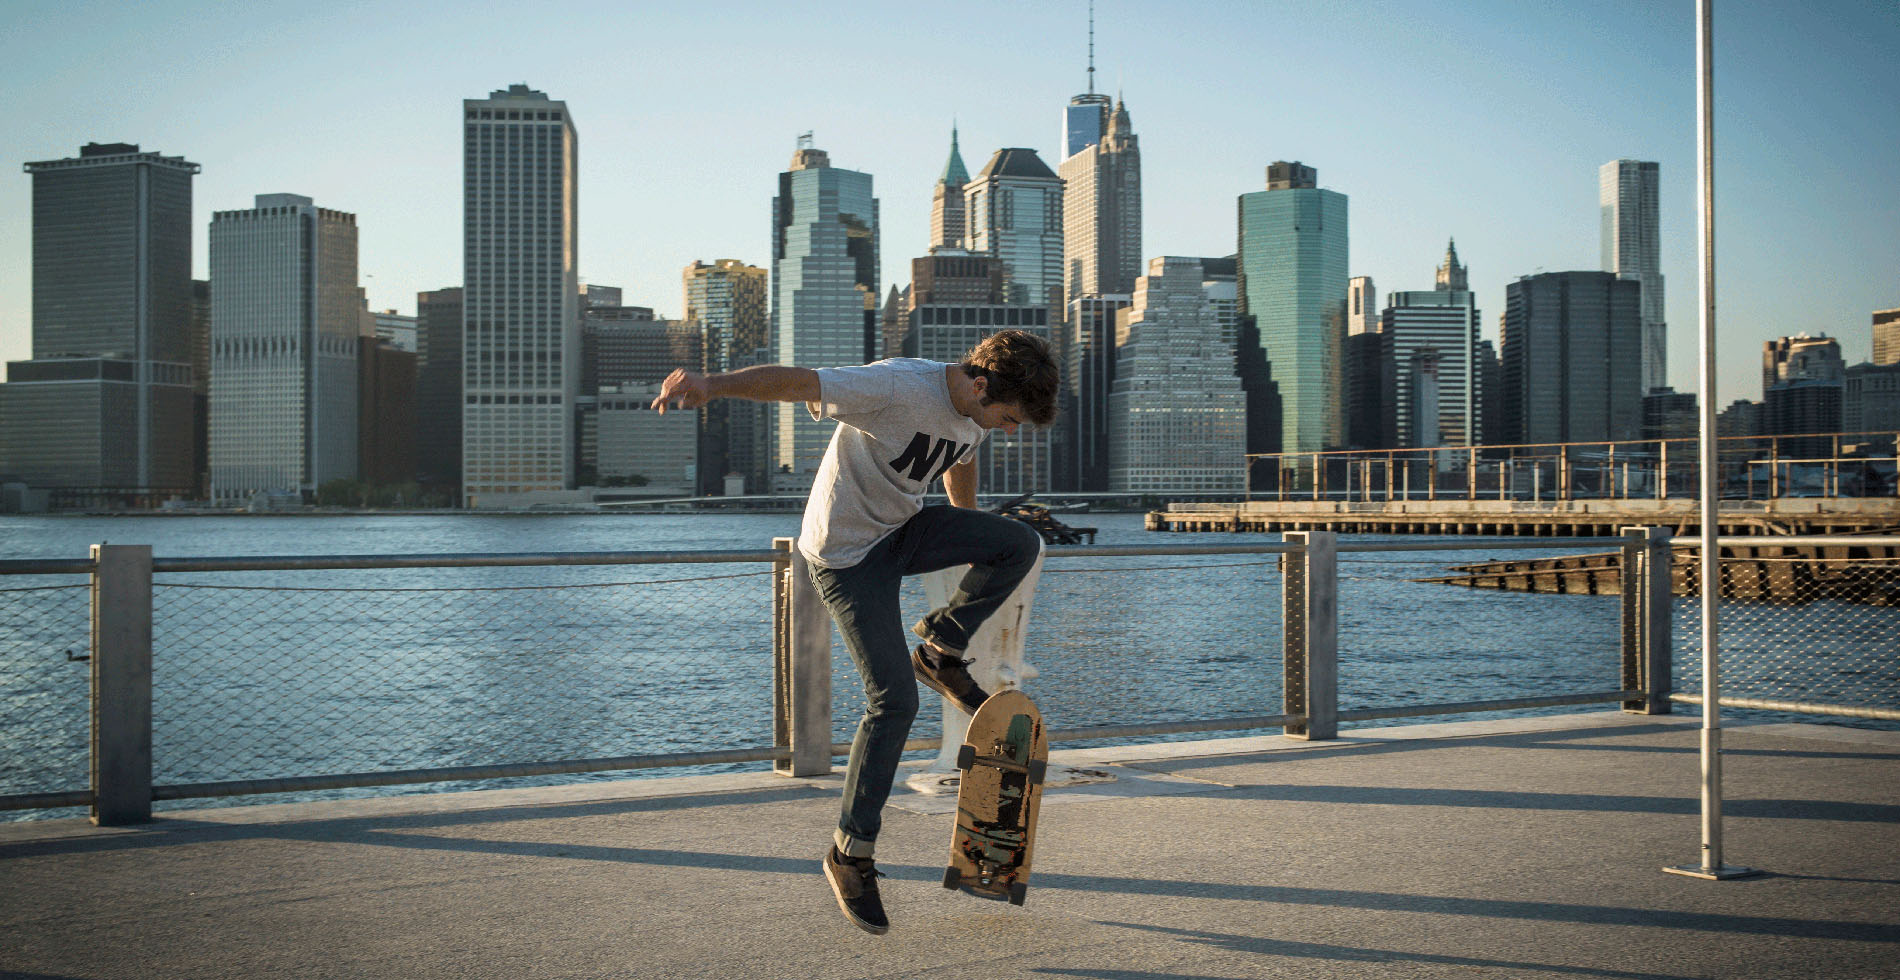 A young person enjoying New York. Image: Getty